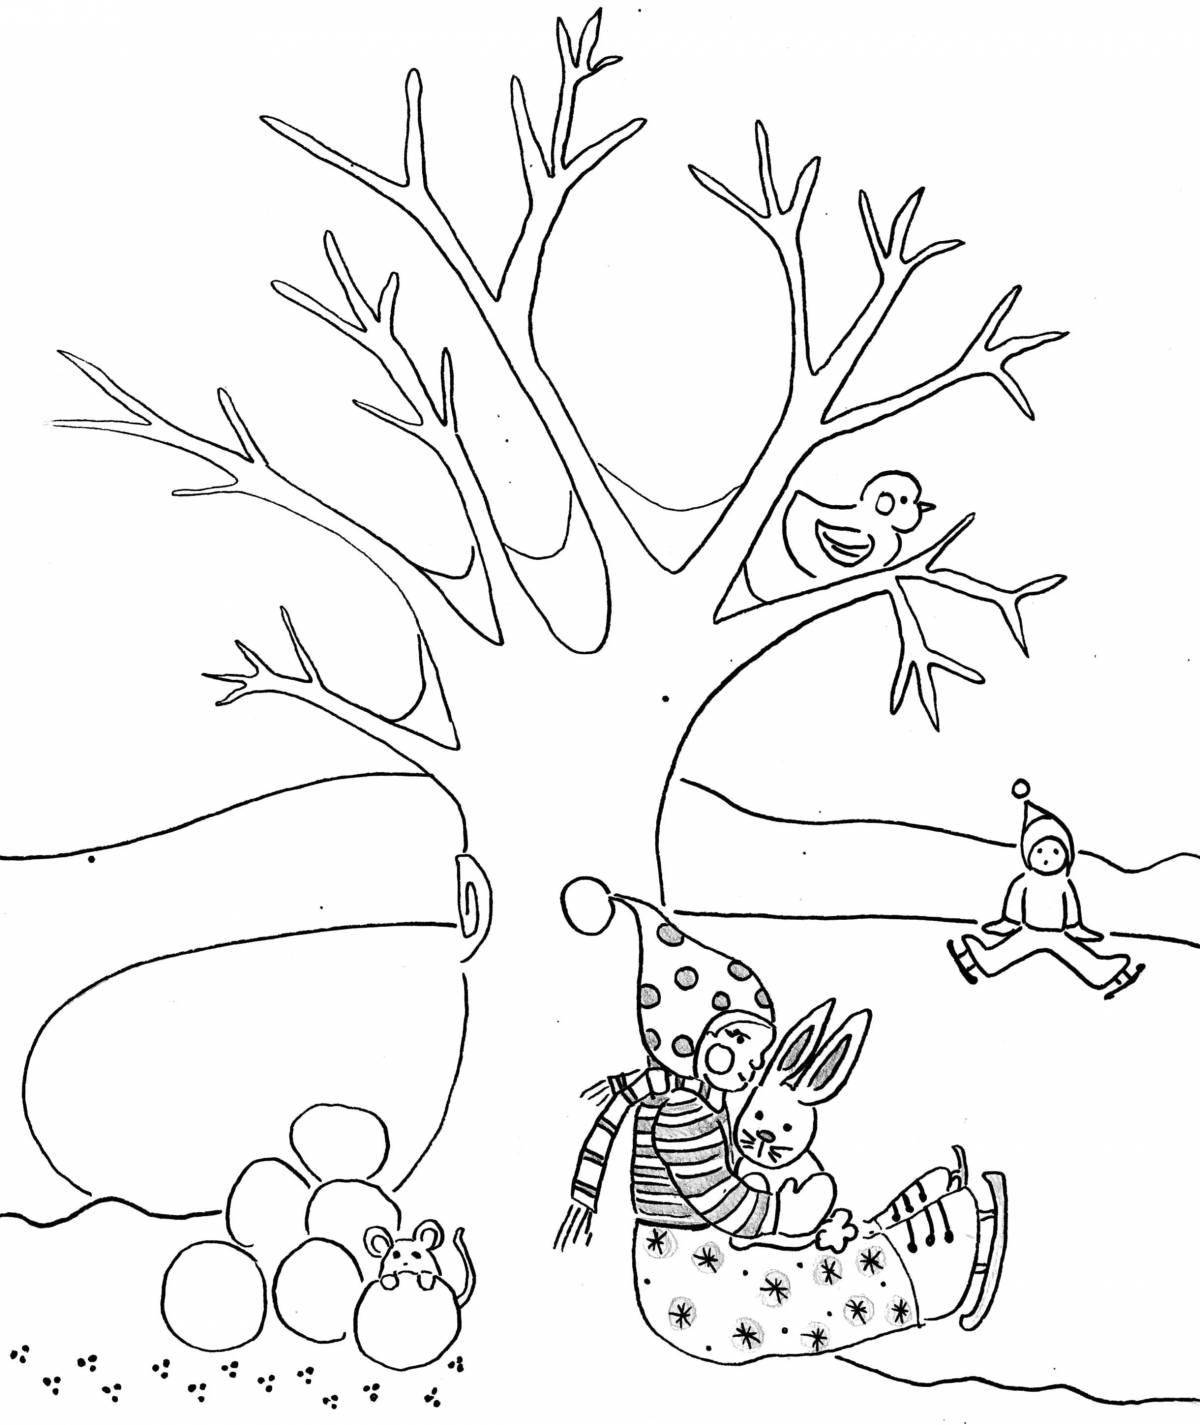 Glitter winter tree coloring book for 3-4 year olds